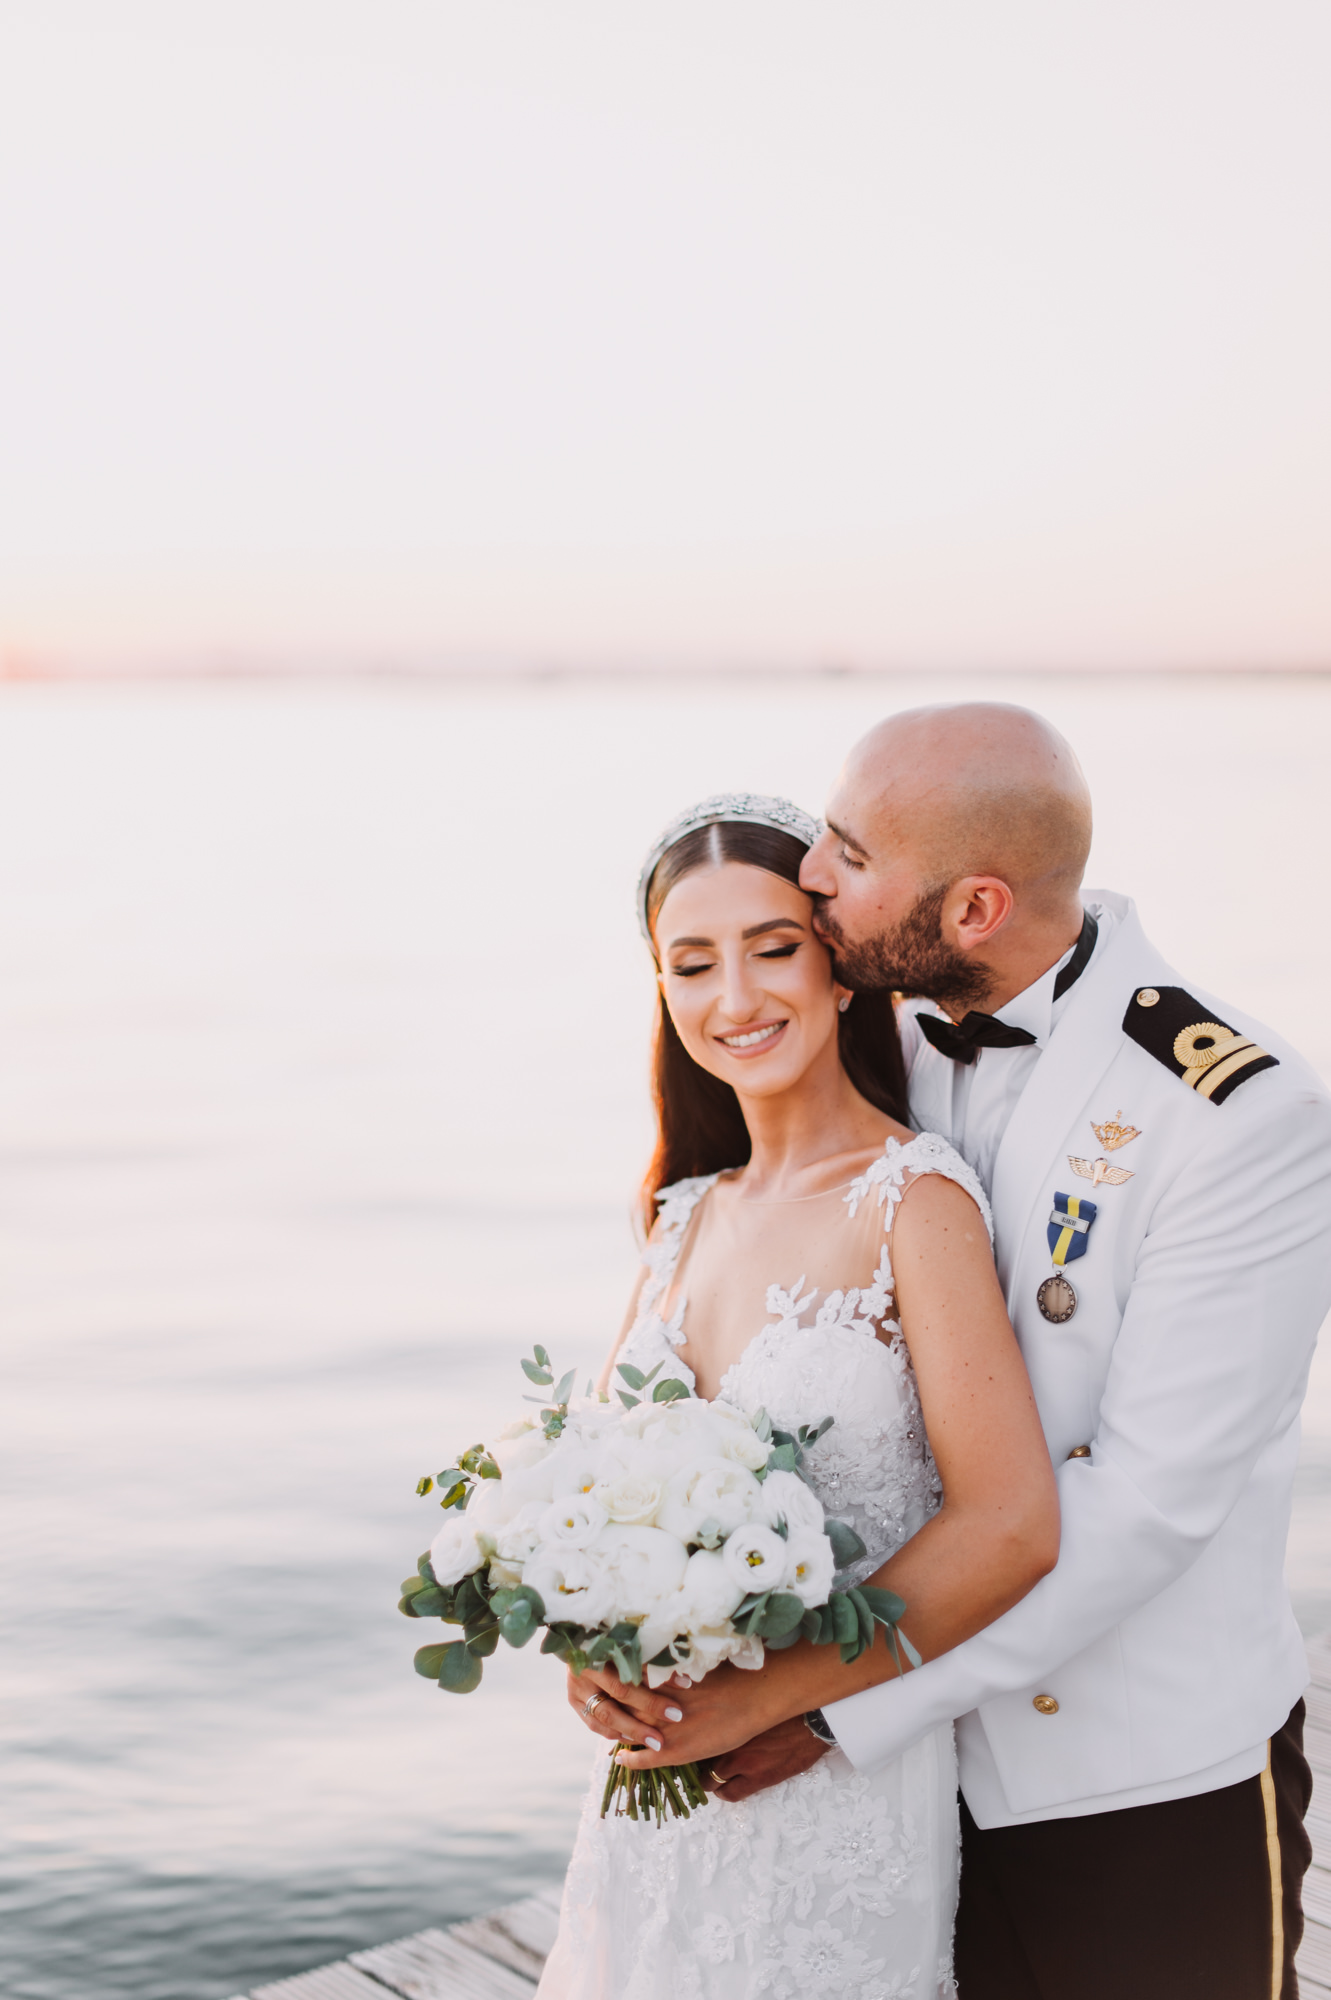 Professional wedding photography in Athens, Greece by Albatross